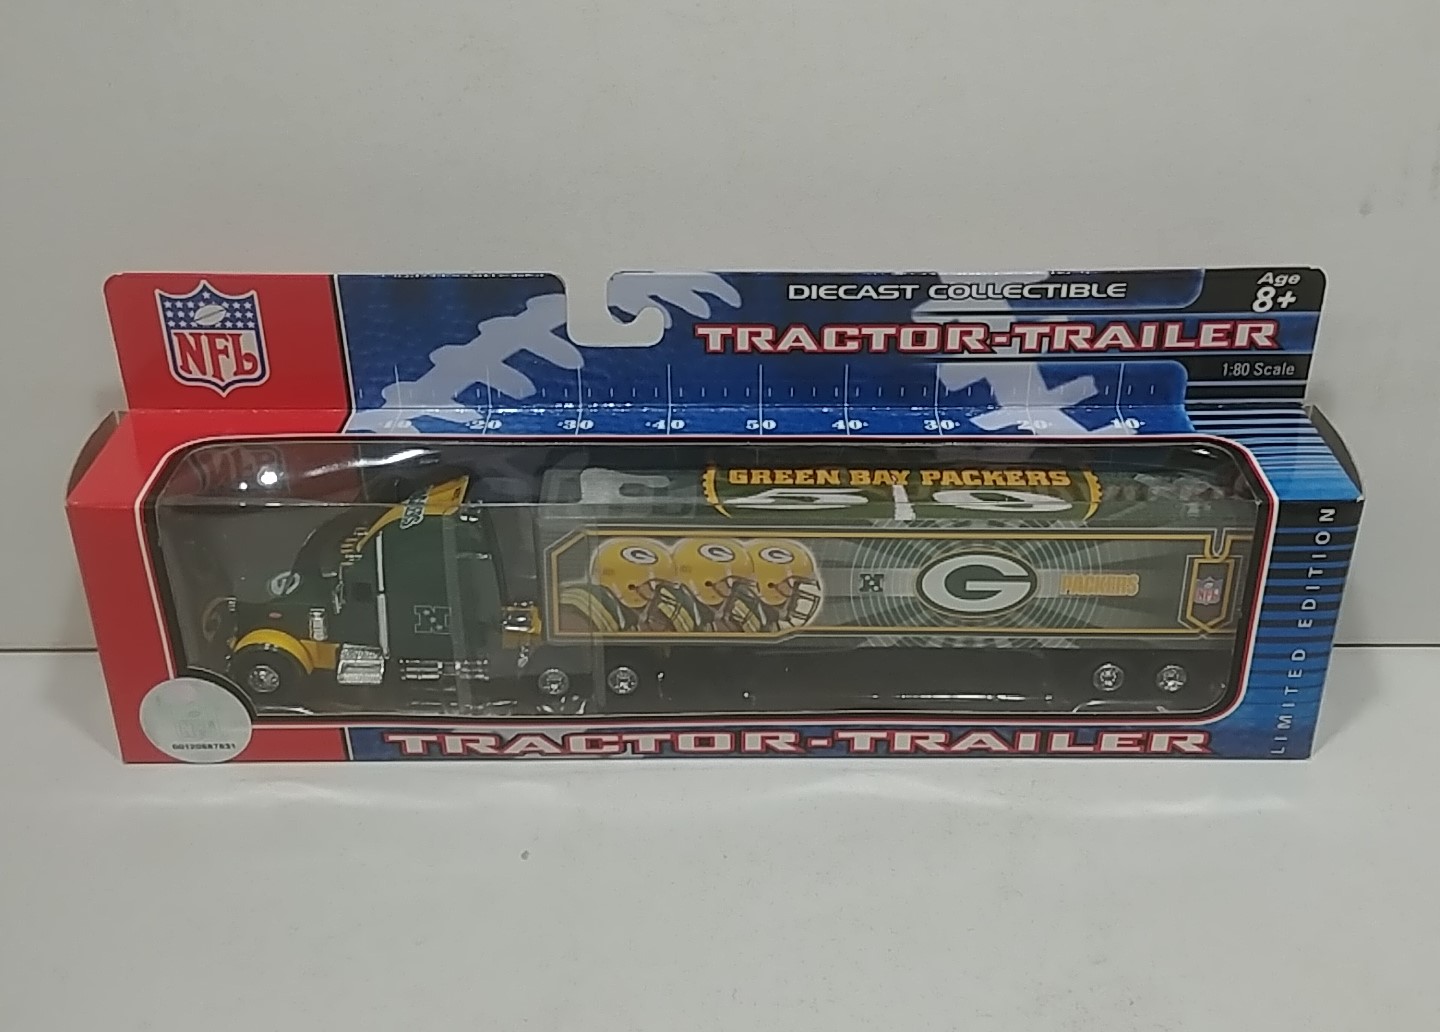 2006 Green Bay Packers 1/80th Transporter